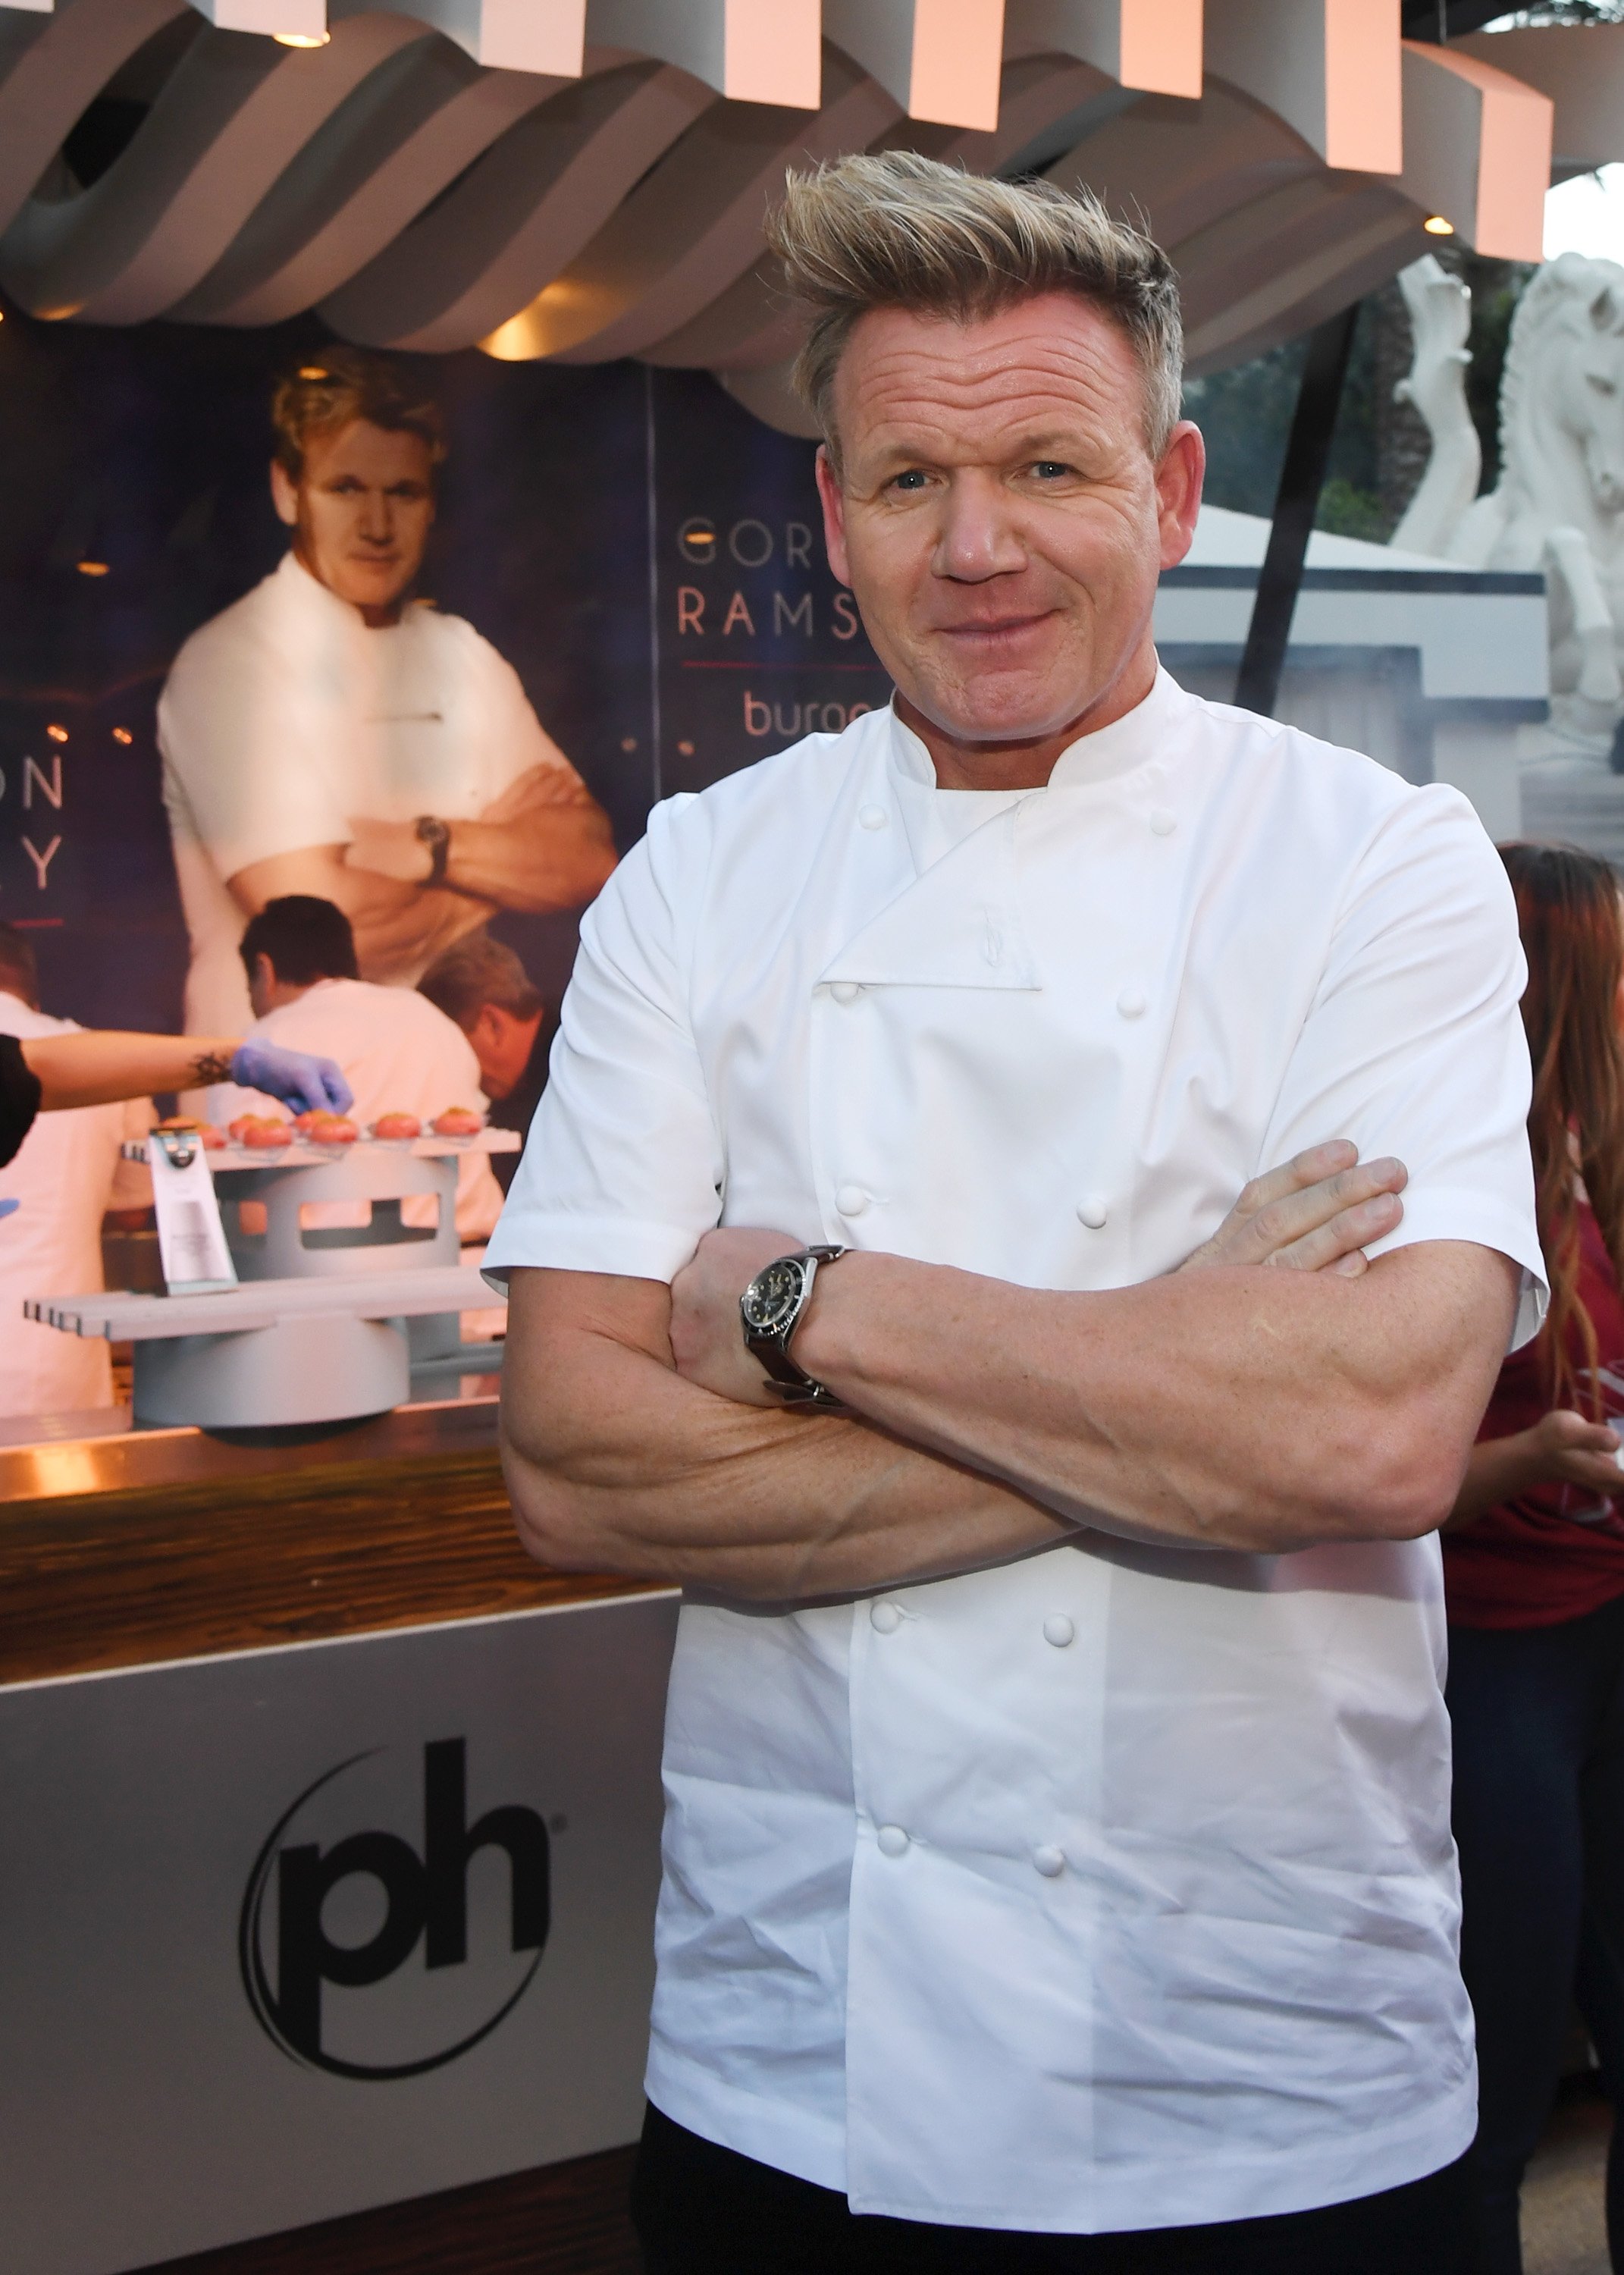 Gordon Ramsay attends the 12th annual Vegas Uncork'd by Bon Appetit Grand Tasting event on May 11, 2018, in Las Vegas, Nevada. | Source: Getty Images.